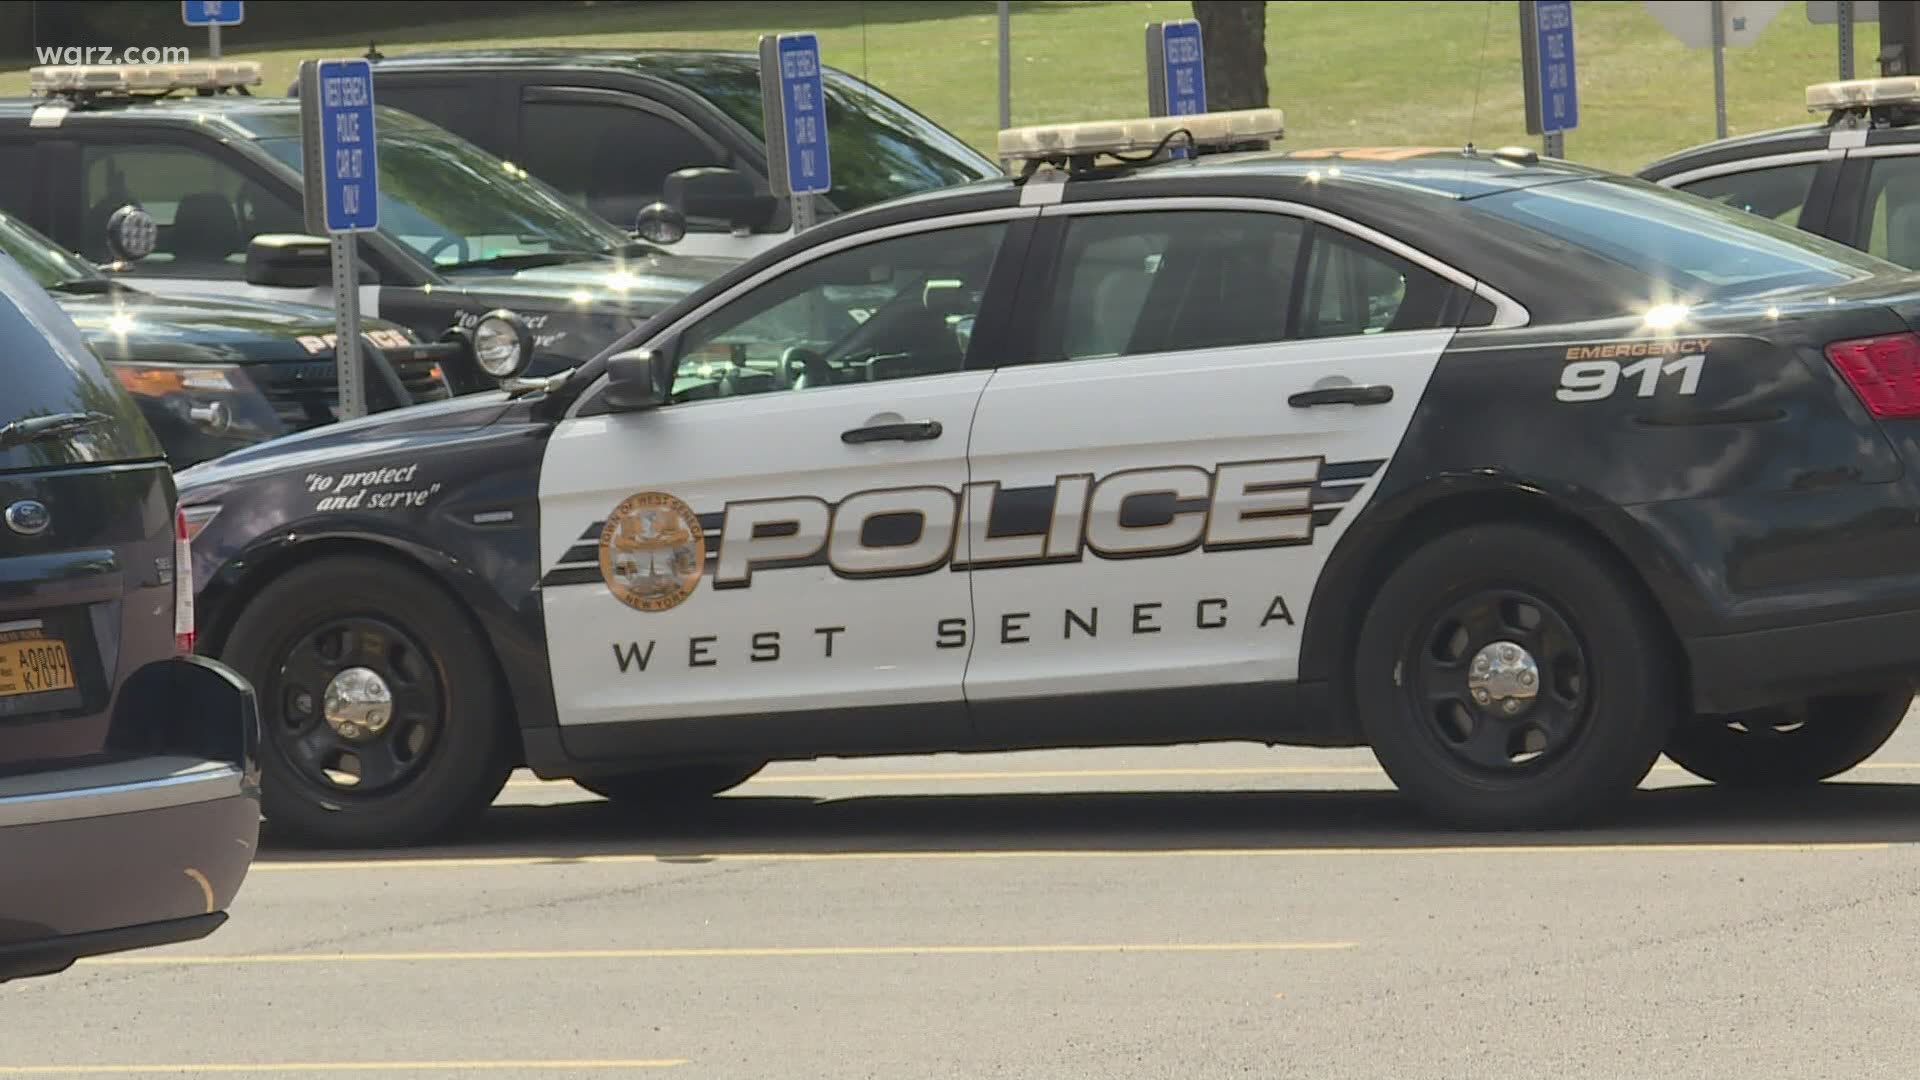 The officer, whose name has not been released, resigned from the force while an internal investigation regarding the August 14 incident was underway.